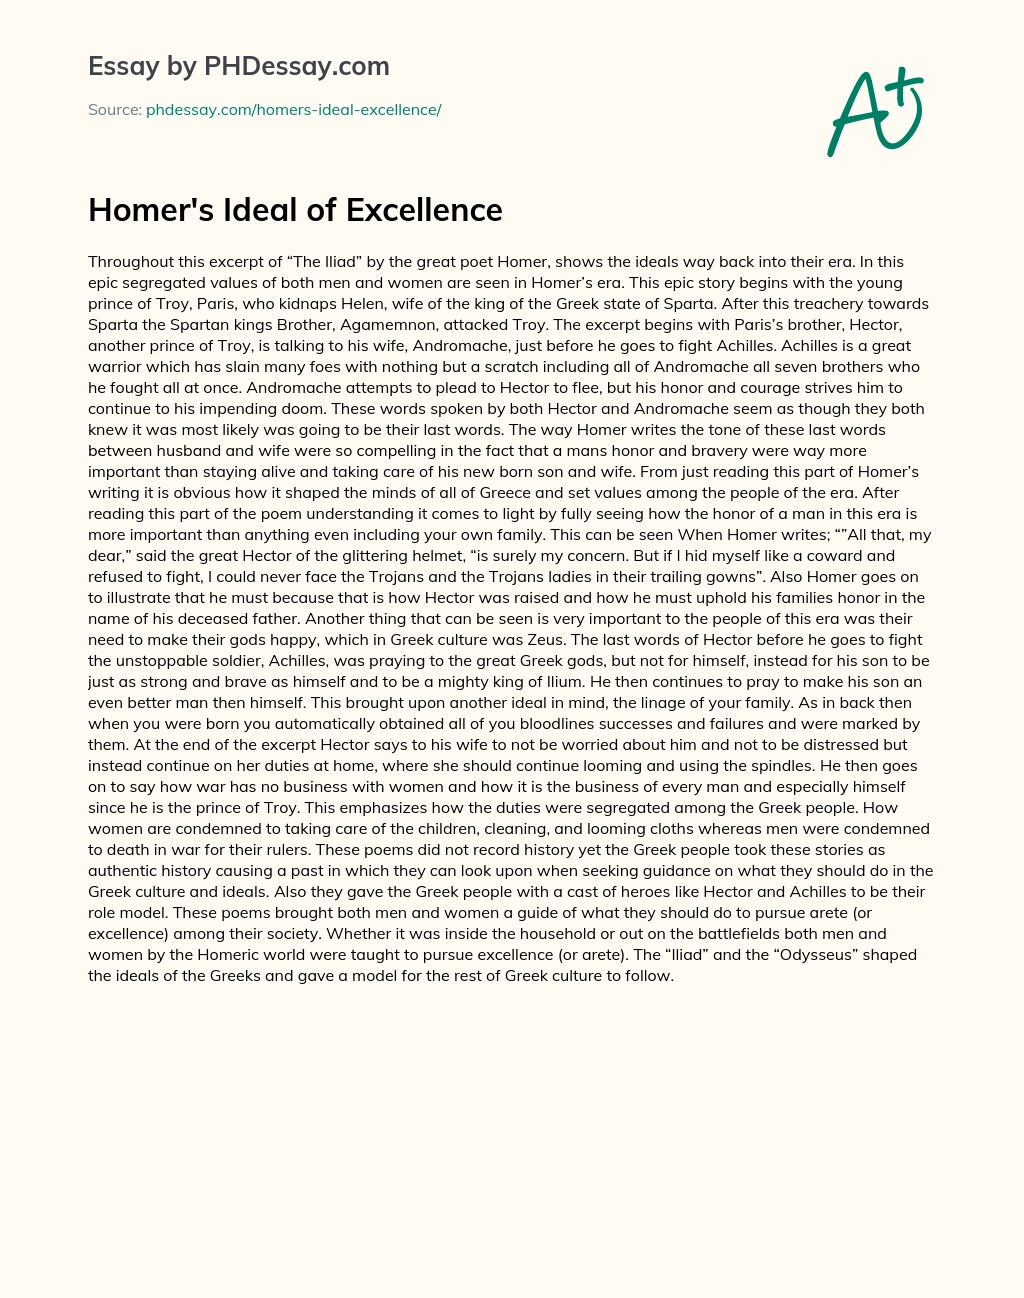 Homer’s Ideal of Excellence essay